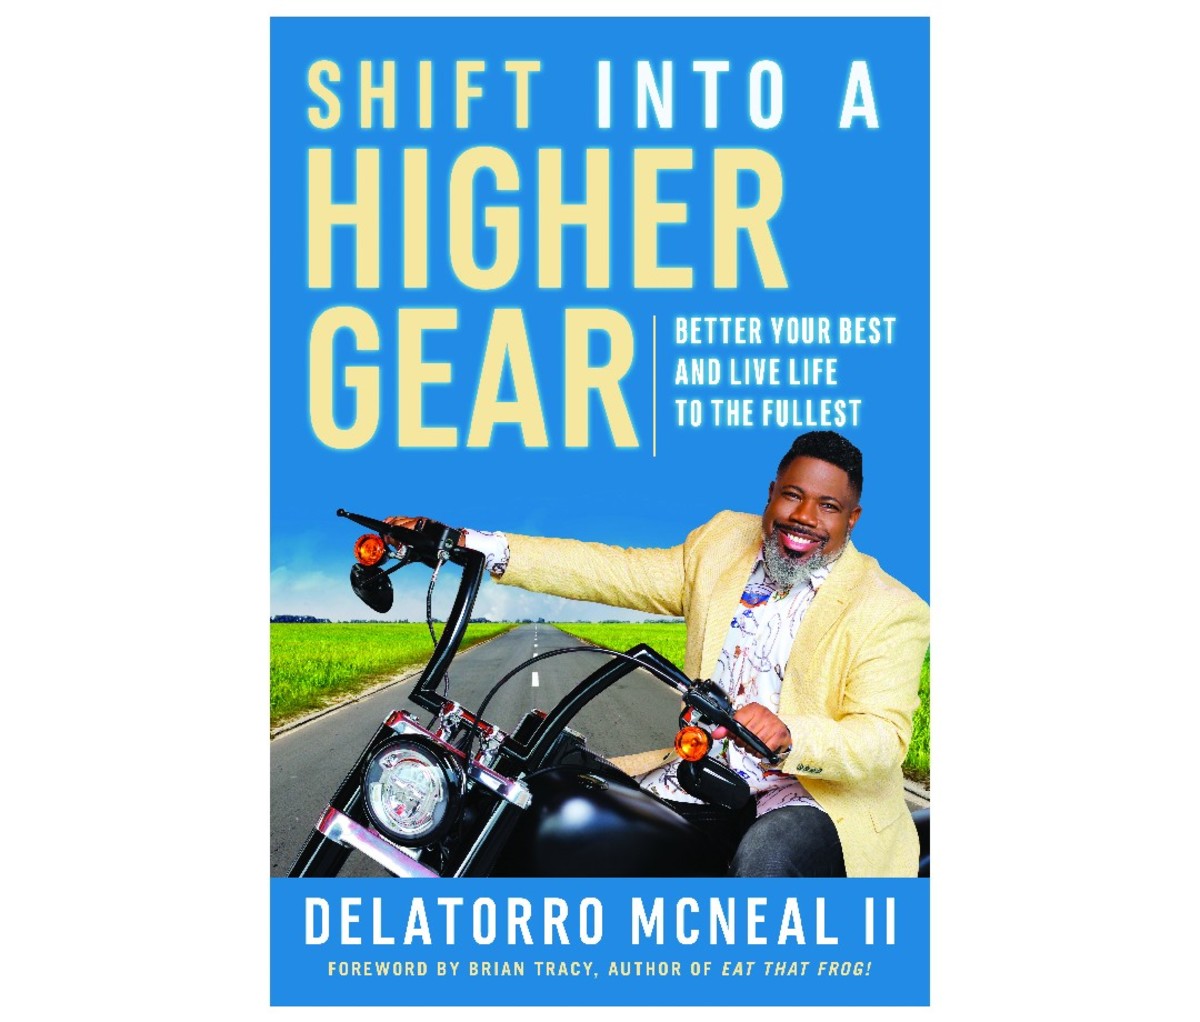 Shift into higher gear: improve your best and live life to the fullest by Delatorro McNeal